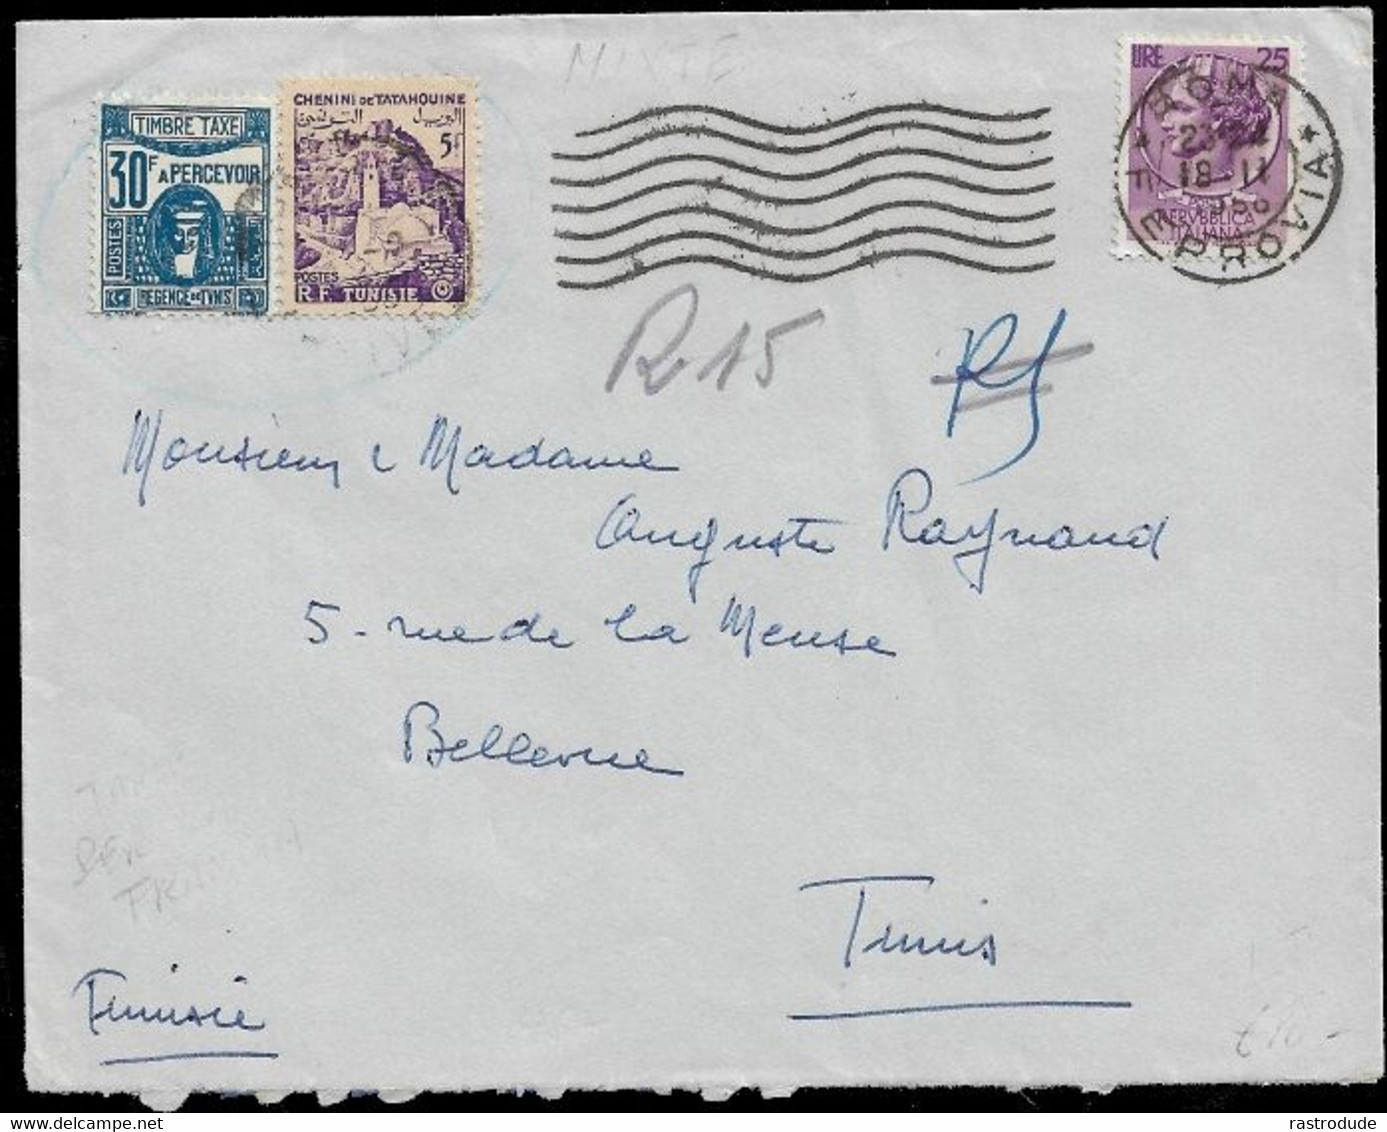 1958 ITALY To TUNISIA W. MIXED FRANKING 5Fr TUNIS AND 30Fr POSTAGE DUE - RARE - Postage Due